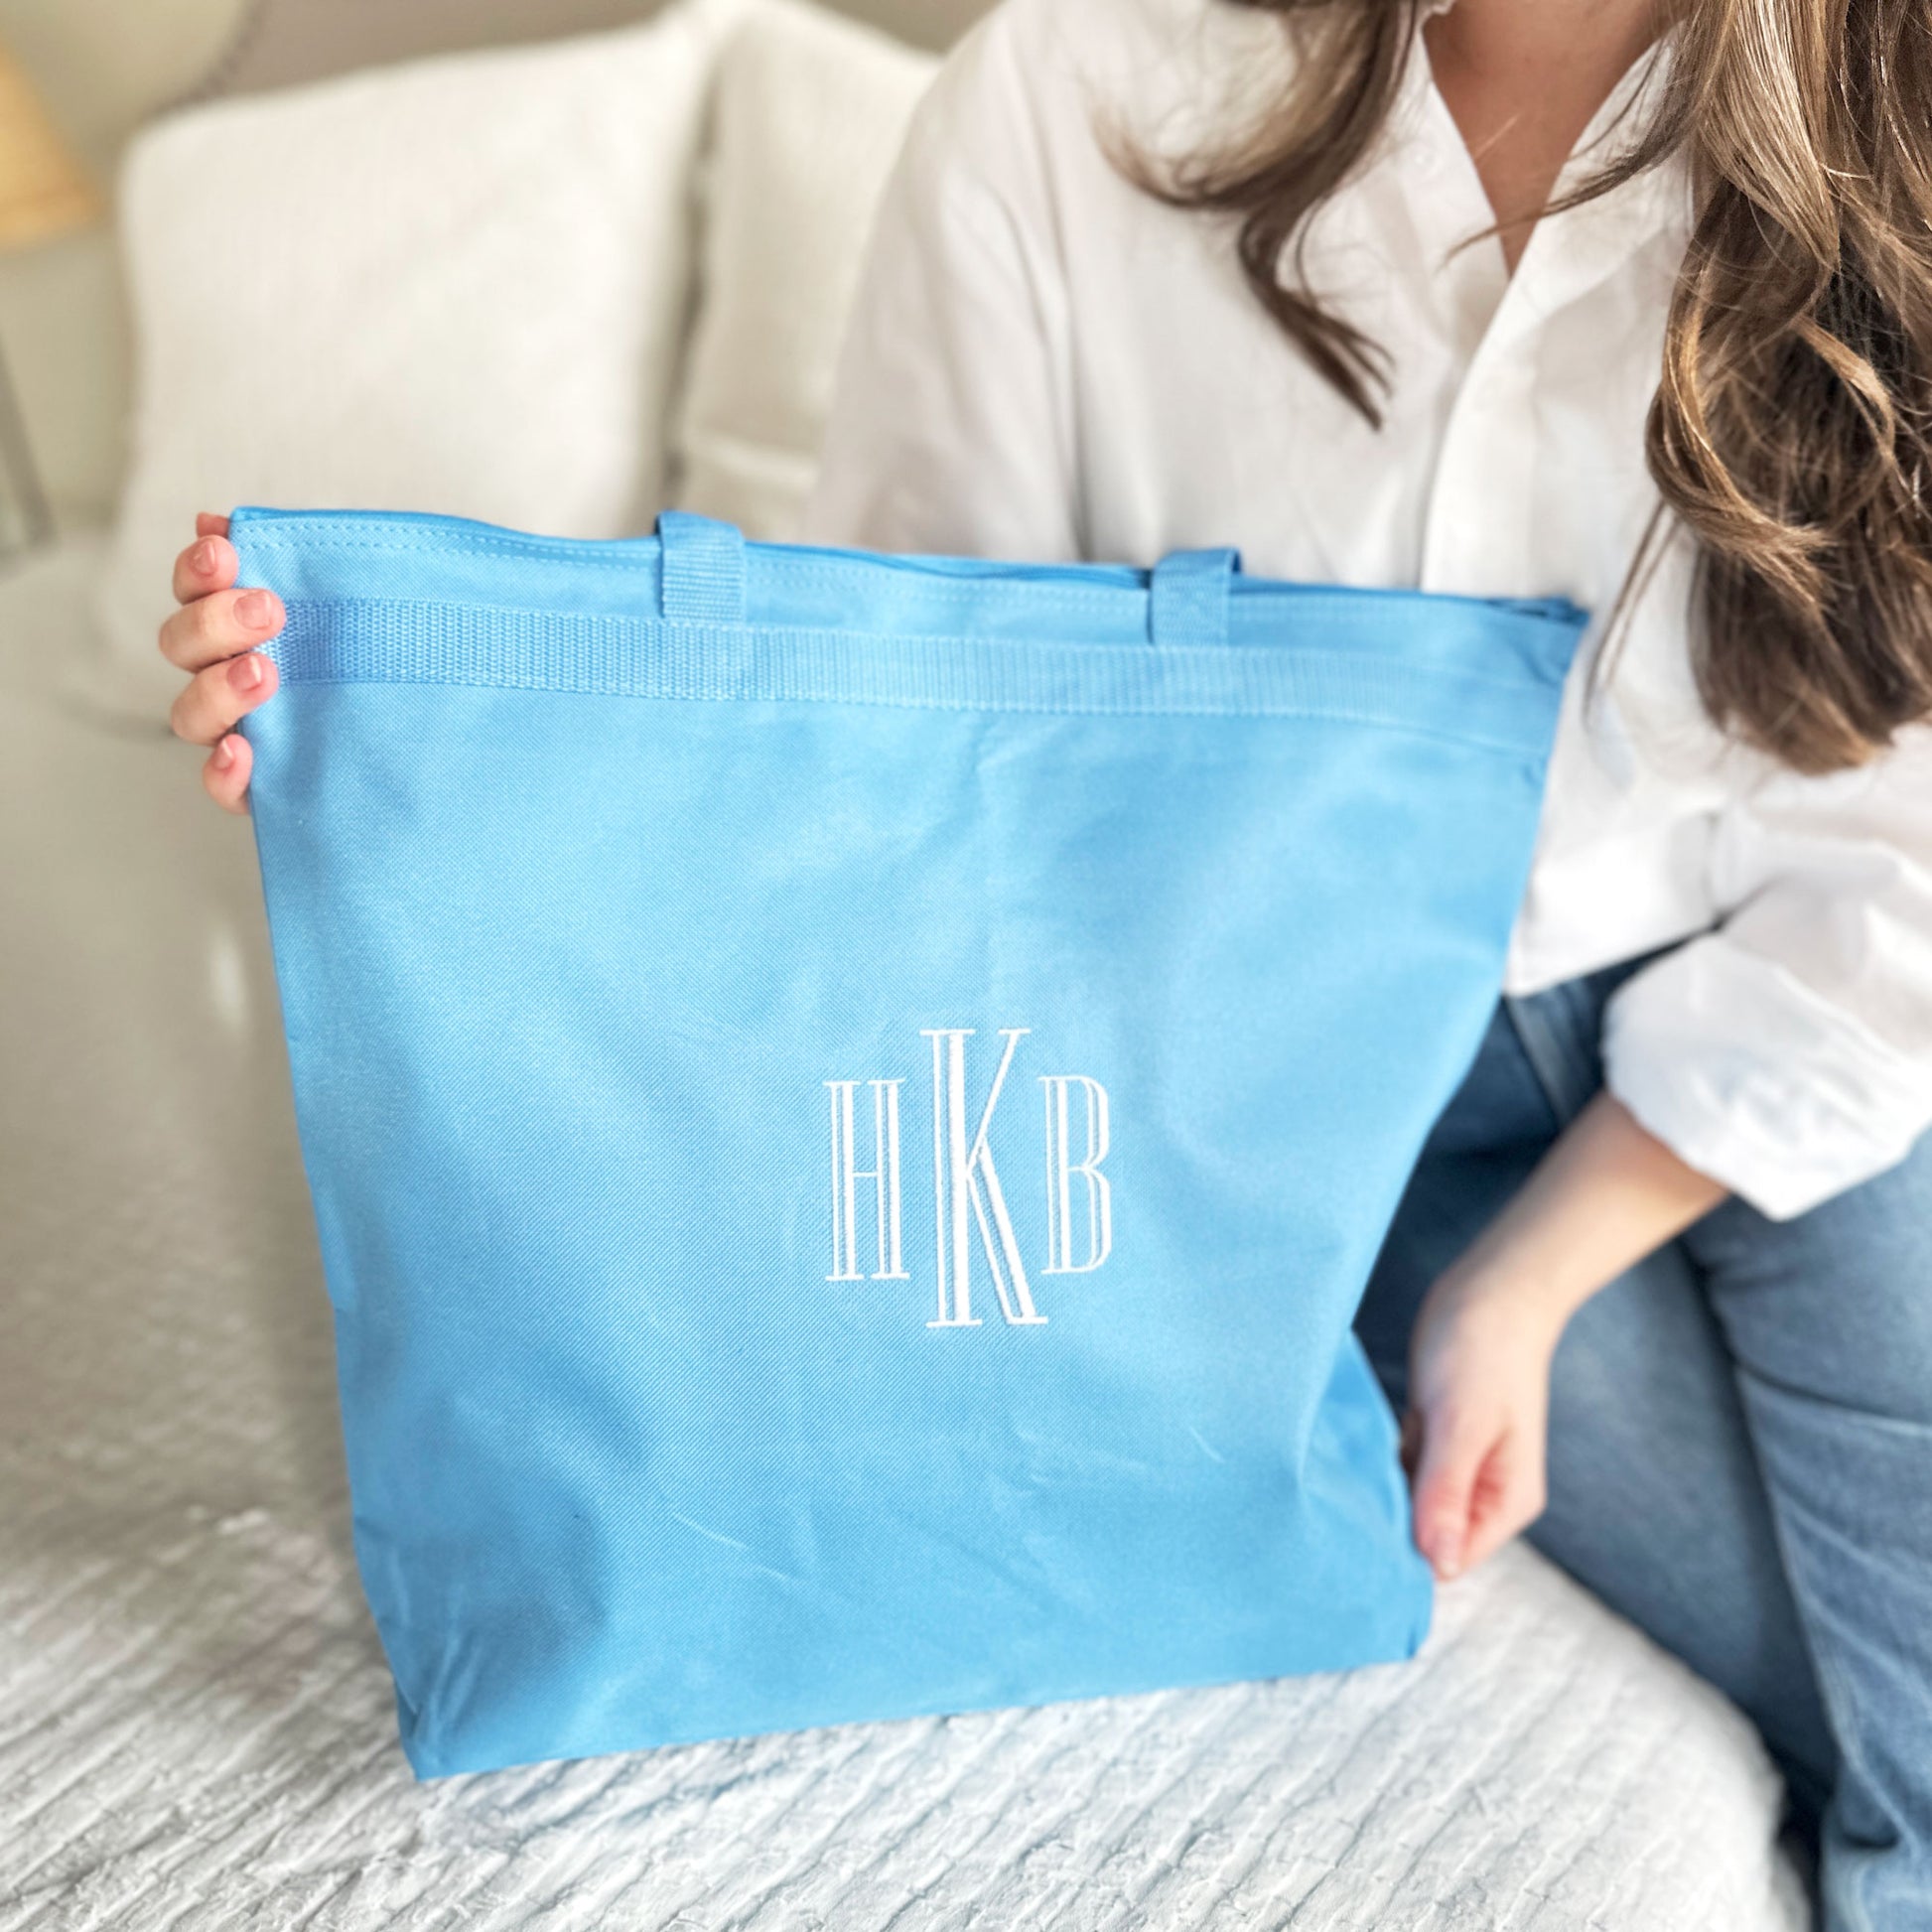 light blue tote bag with monogram embroidered in white thread